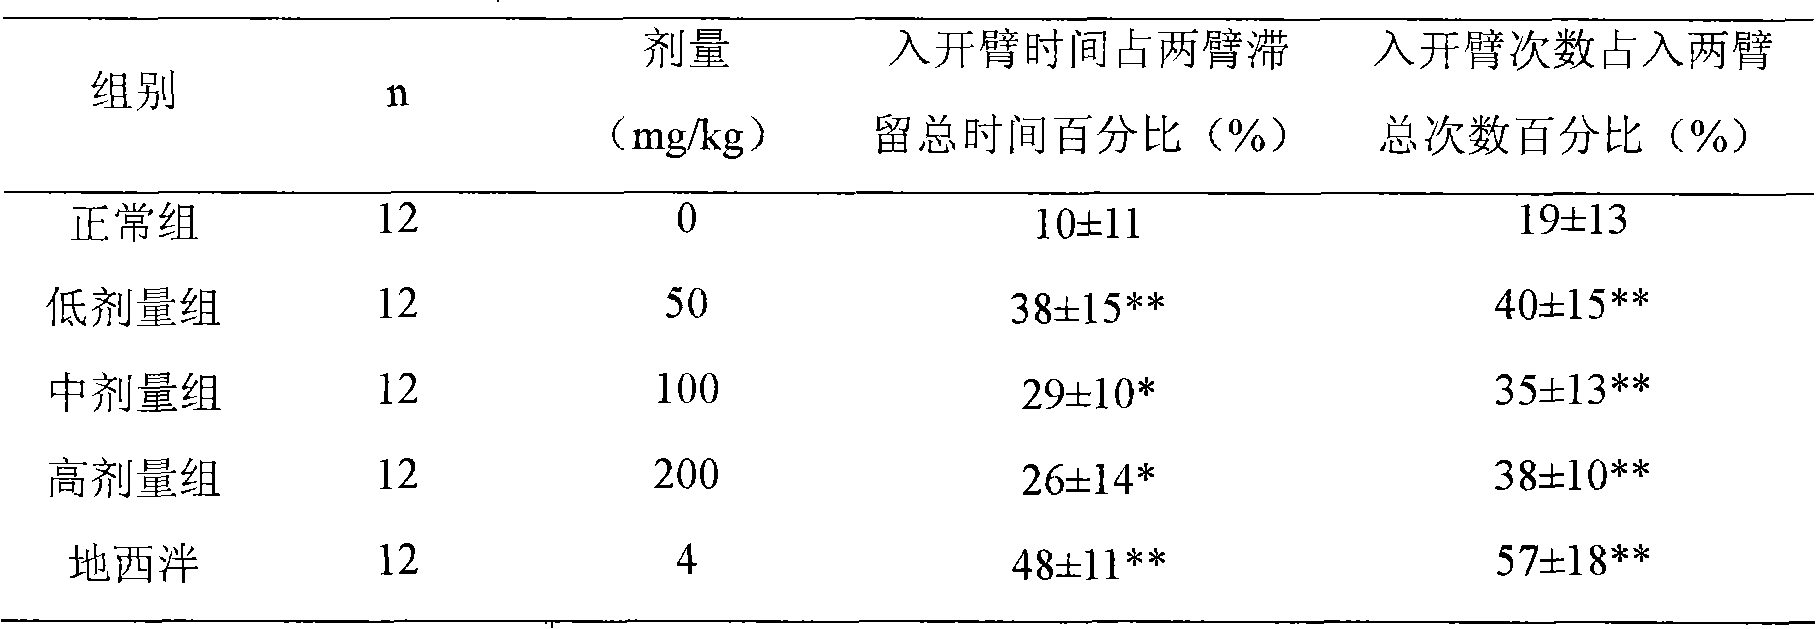 Anti-anxiety medicine by using rheum officinate root extract as active ingredient, and method and application thereof